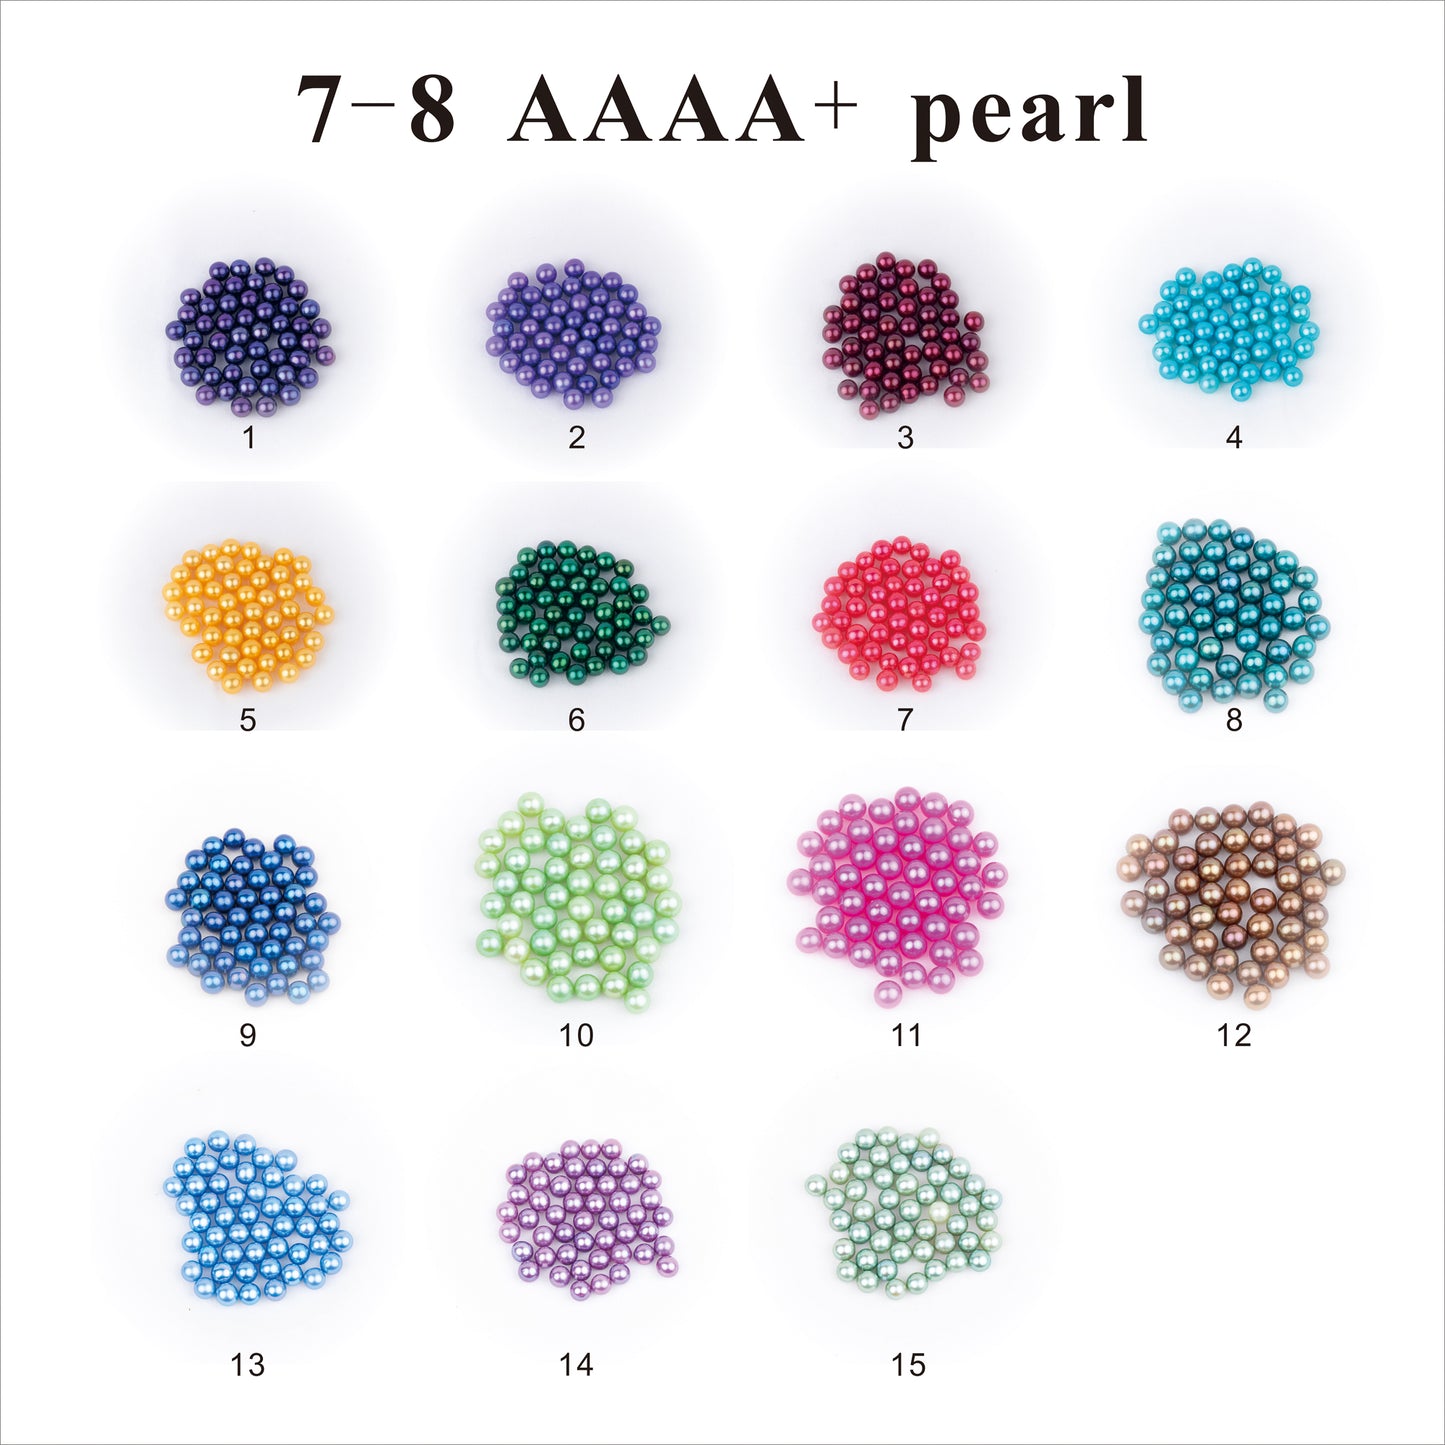 Love Wish Pearl Party Gift Vacuum-packed 7-8mm 4a+ quality 2 pearl in oyster Cultured freshwater Pearl Oyster twin oyster